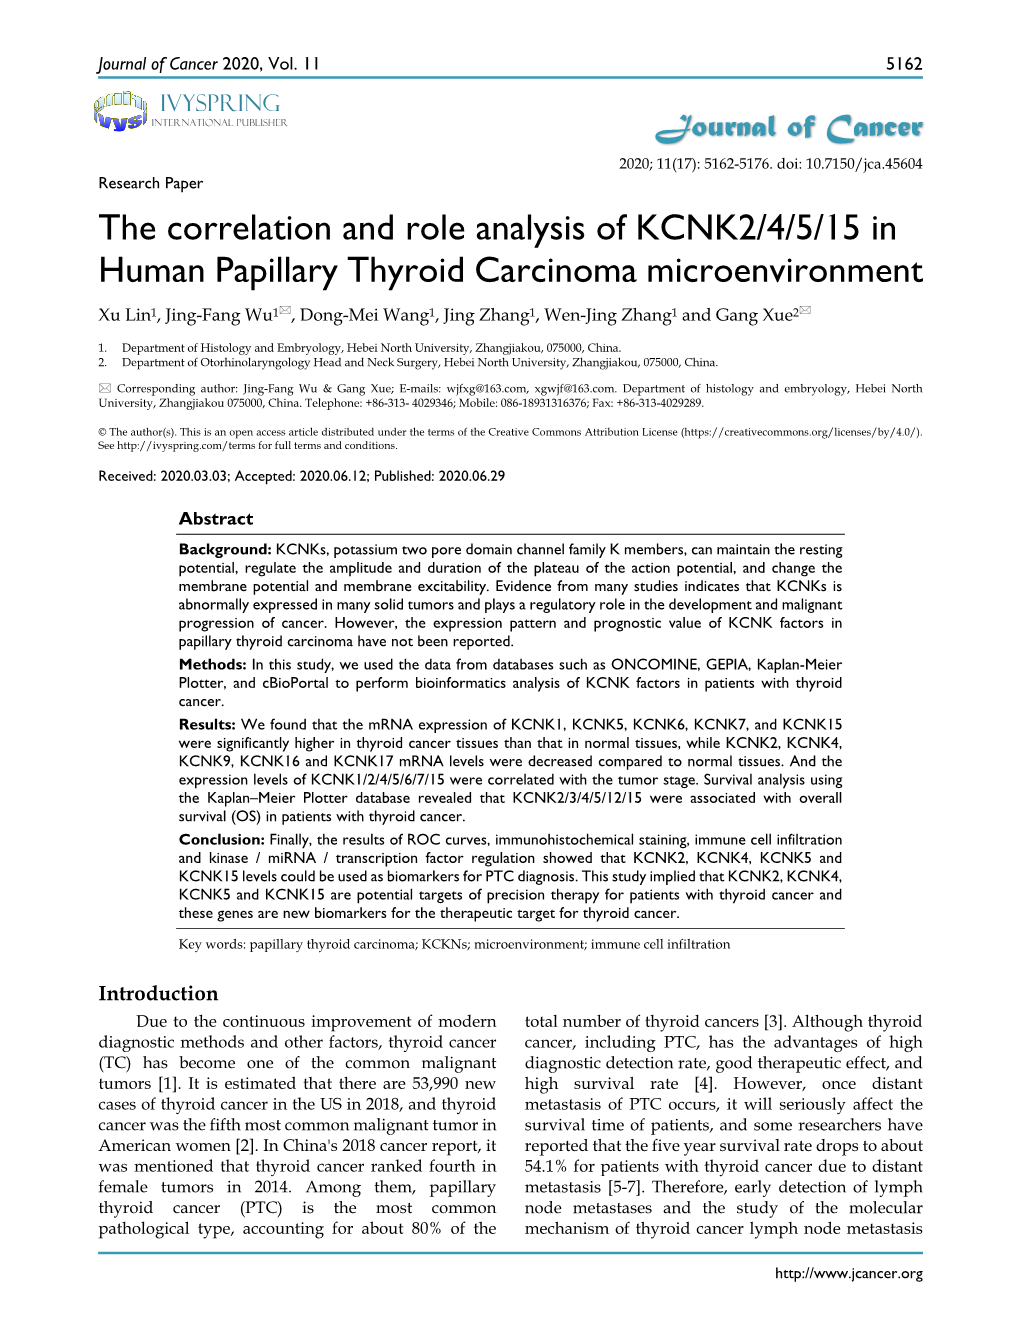 The Correlation and Role Analysis of KCNK2/4/5/15 in Human Papillary